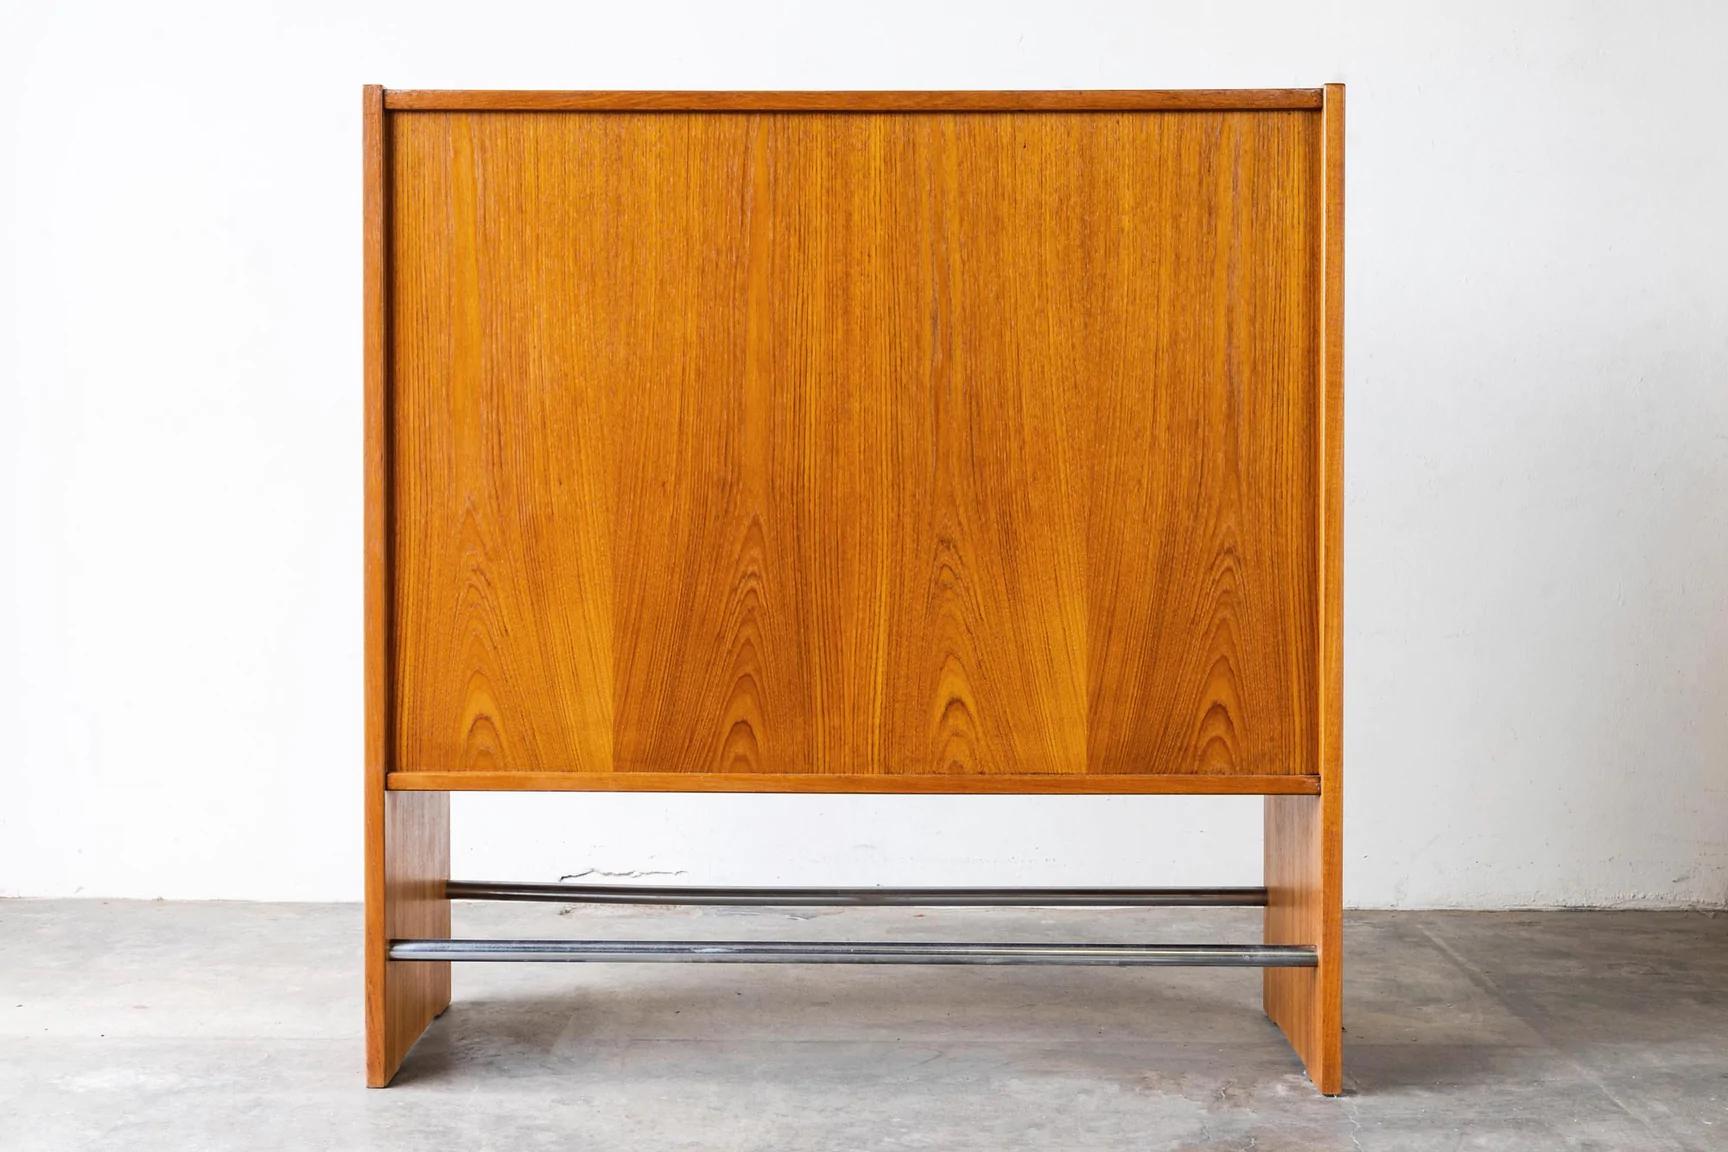 Heltborg Mobler Danish teak bar designed by Poul Heltborg. The bar has 8 bottle holders through the middle and two pull-out stainless steel ice bowls on the right as well as shelving for glassware, and a pull out small shelf. This bar is often